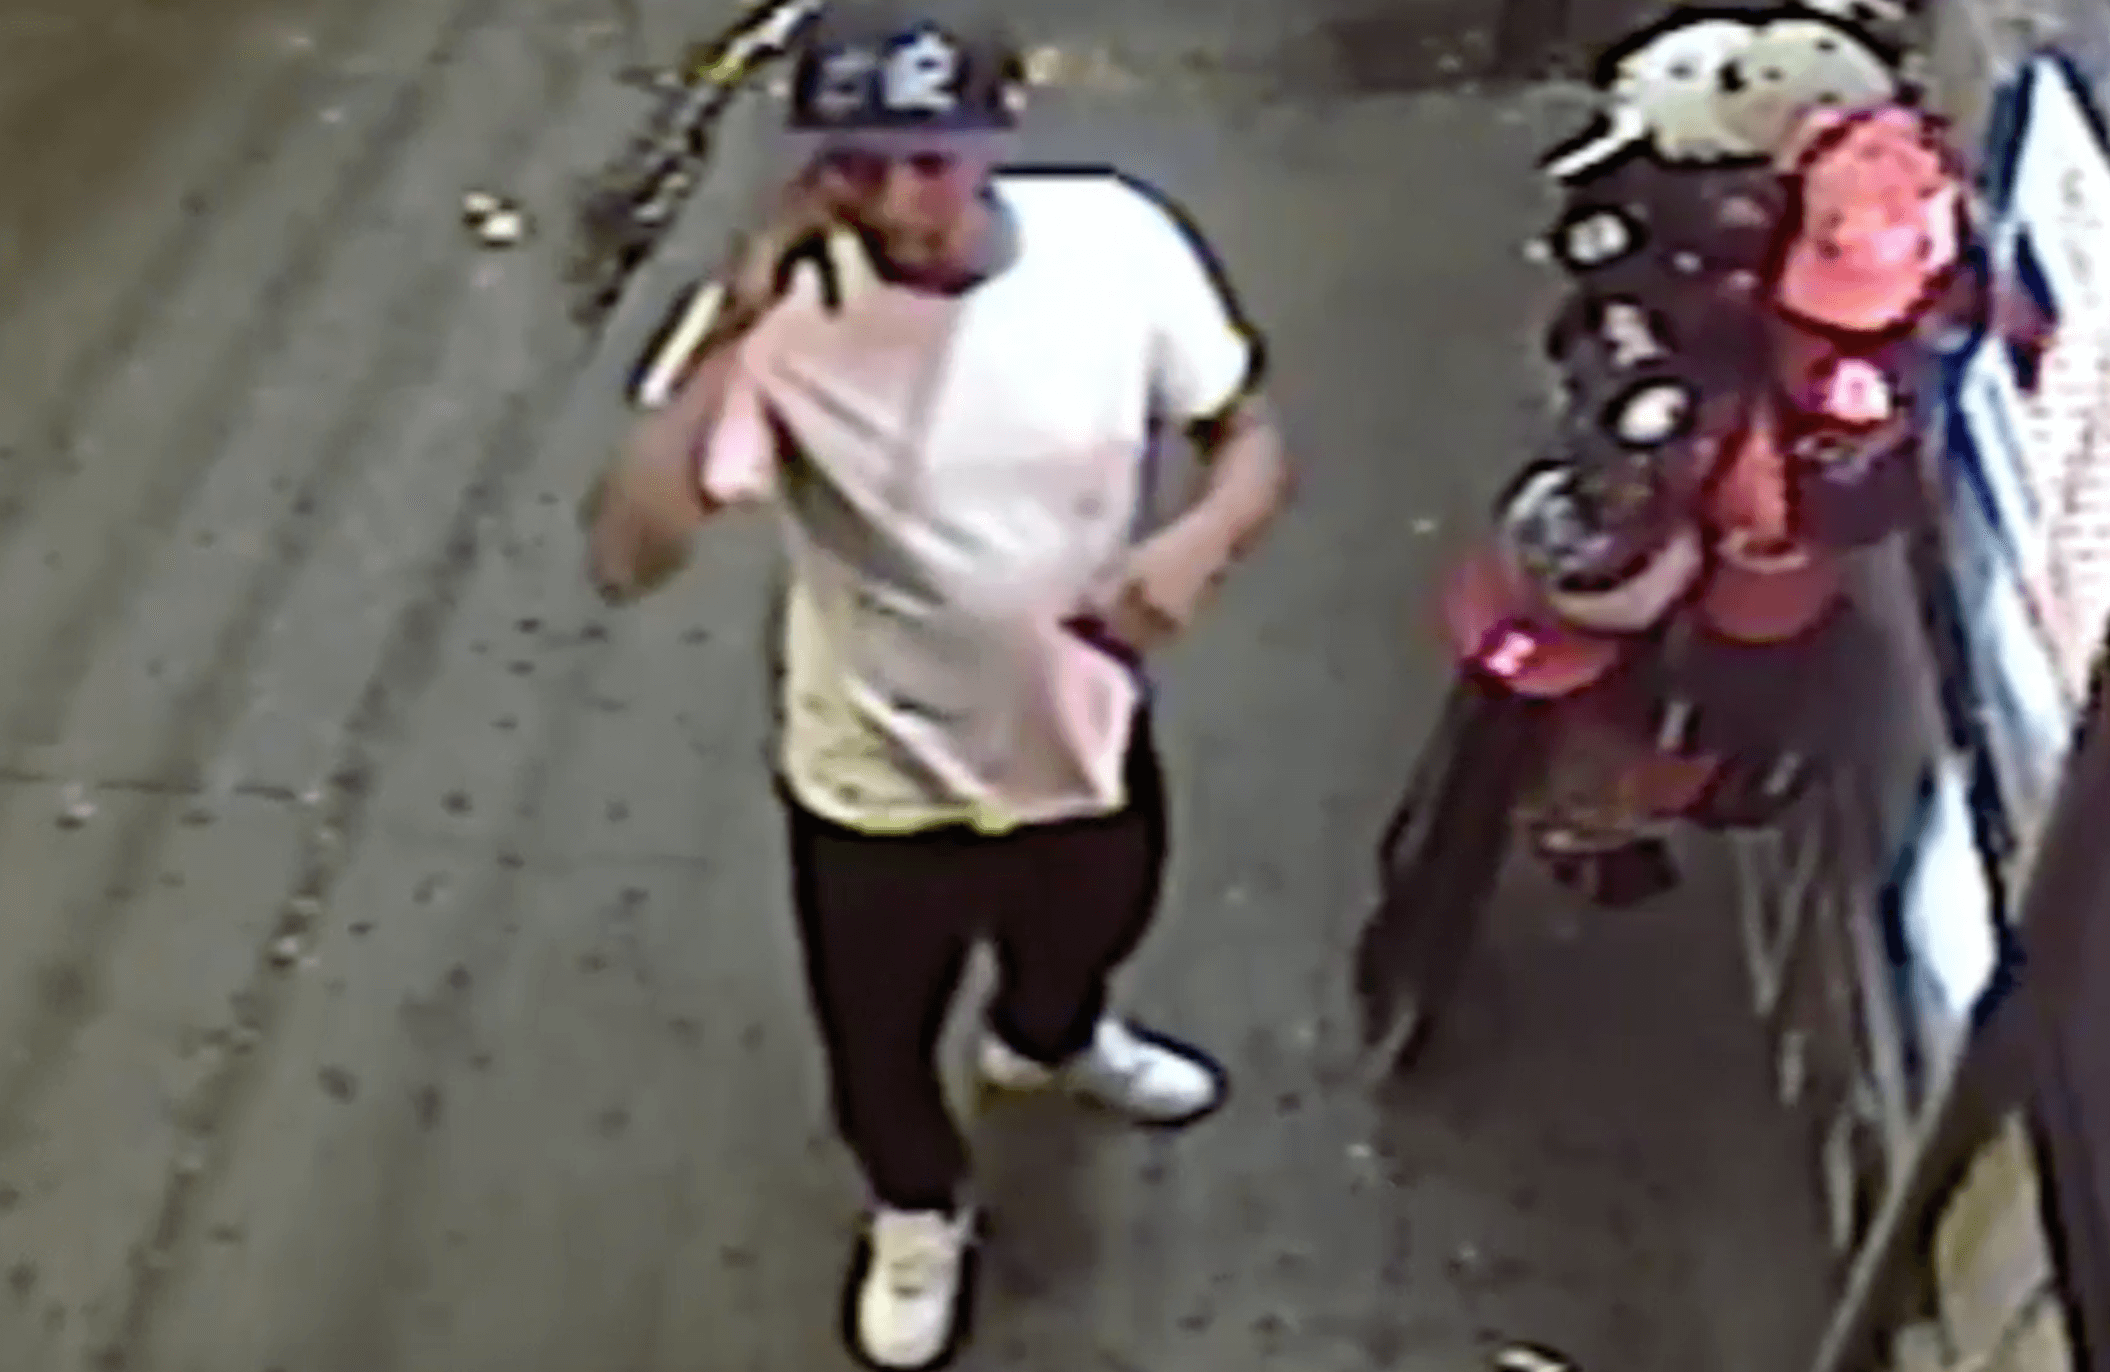 The suspect wanted for a series of street robberies in South Richmond Hill.